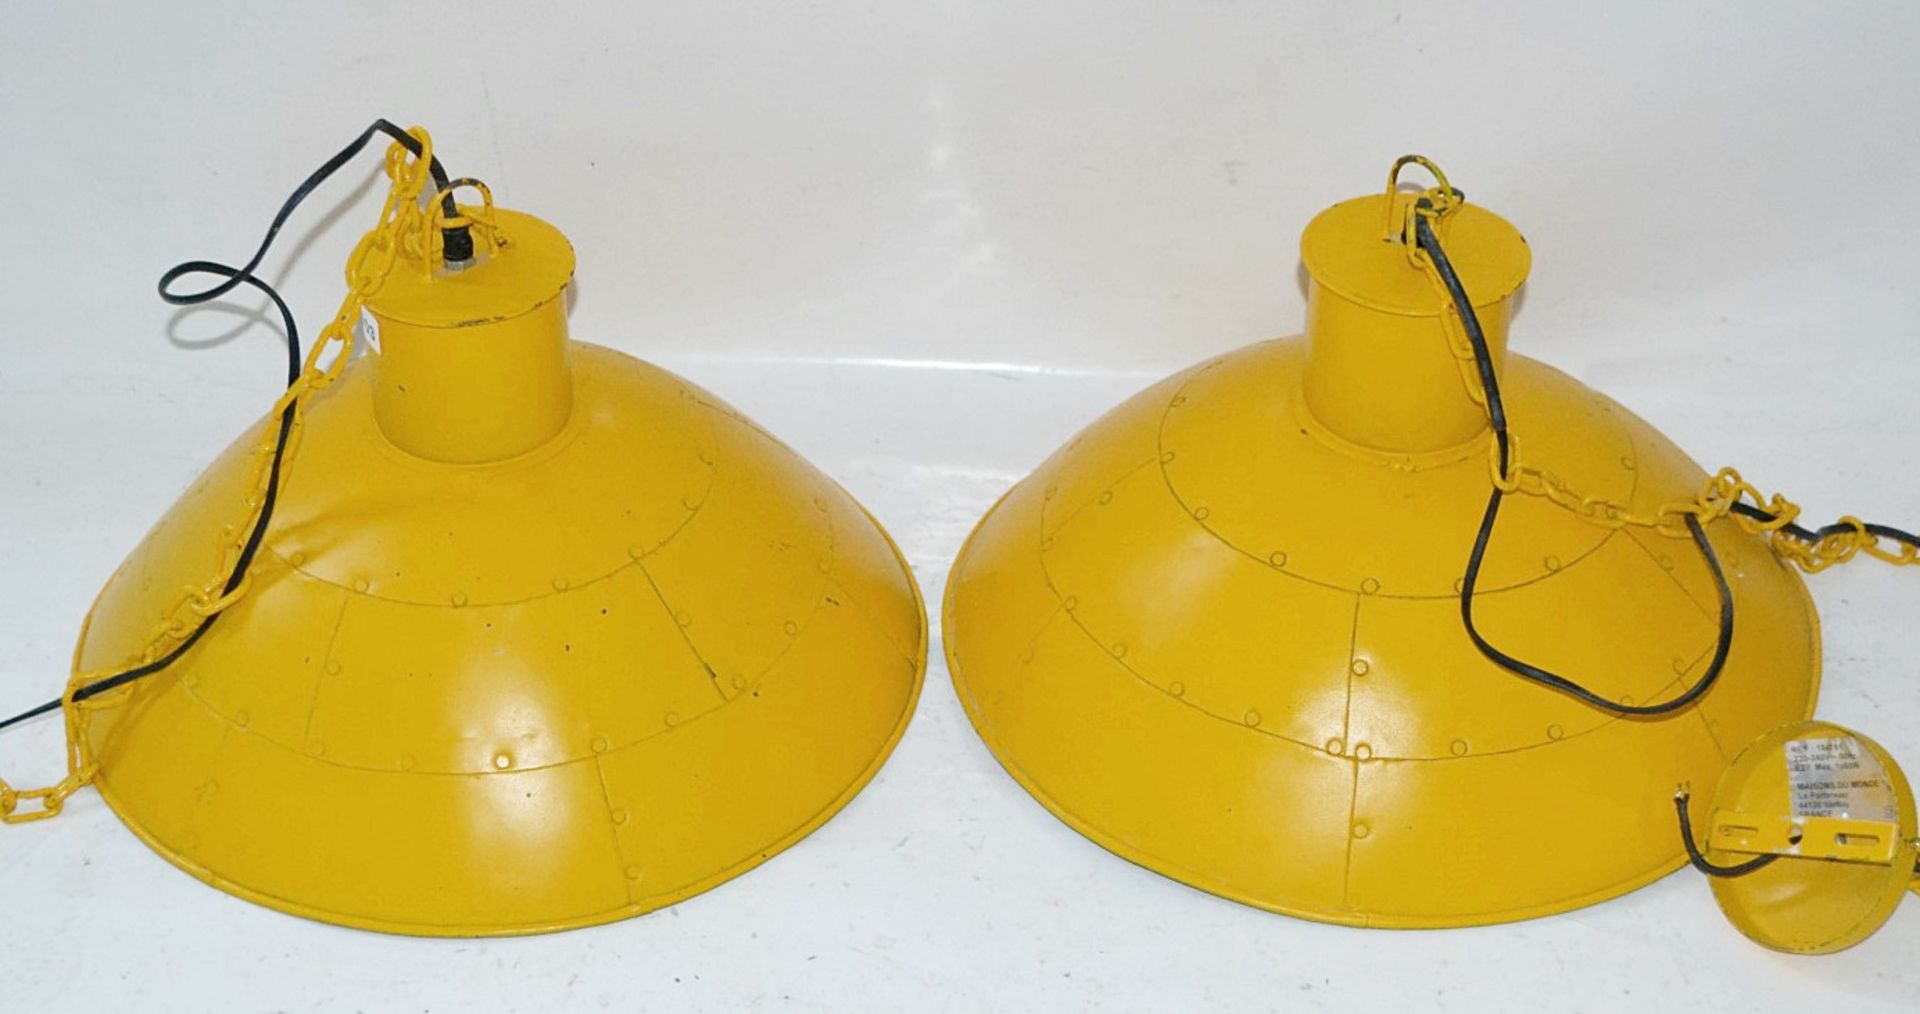 A Pair Of MAISONS DU MONDE Industrial-style Pendant Lights In Bright Yellow - Image 3 of 7